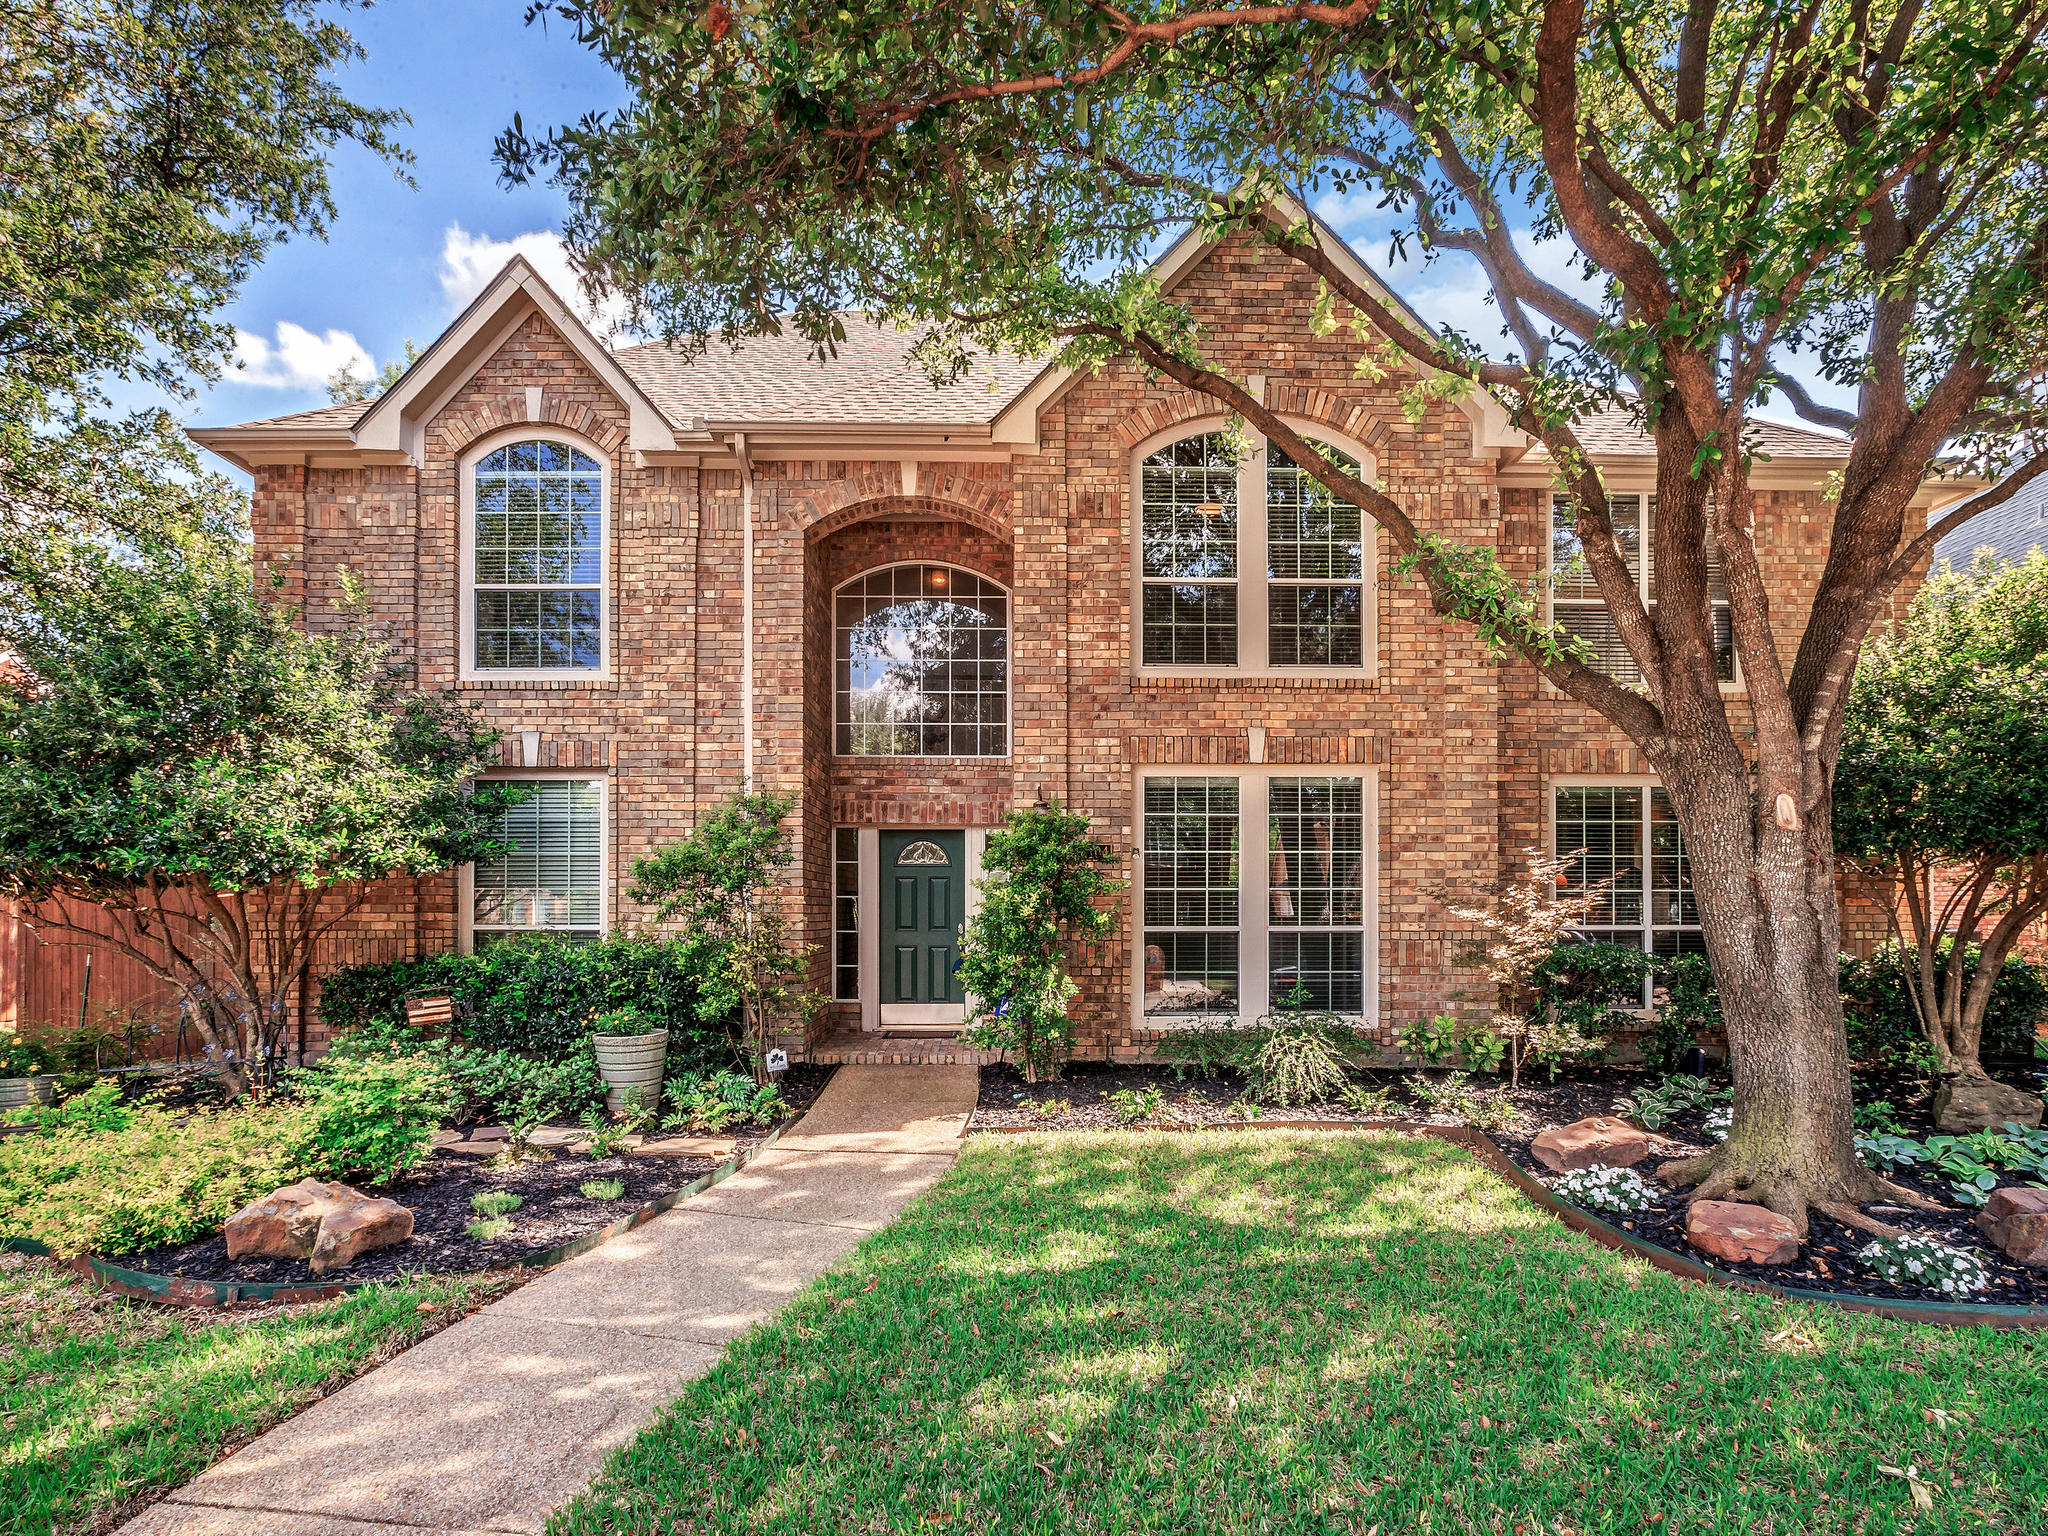 Homes for Sale in Plano, TX - 6104 Birkdale Dr. Plano, TX 75093